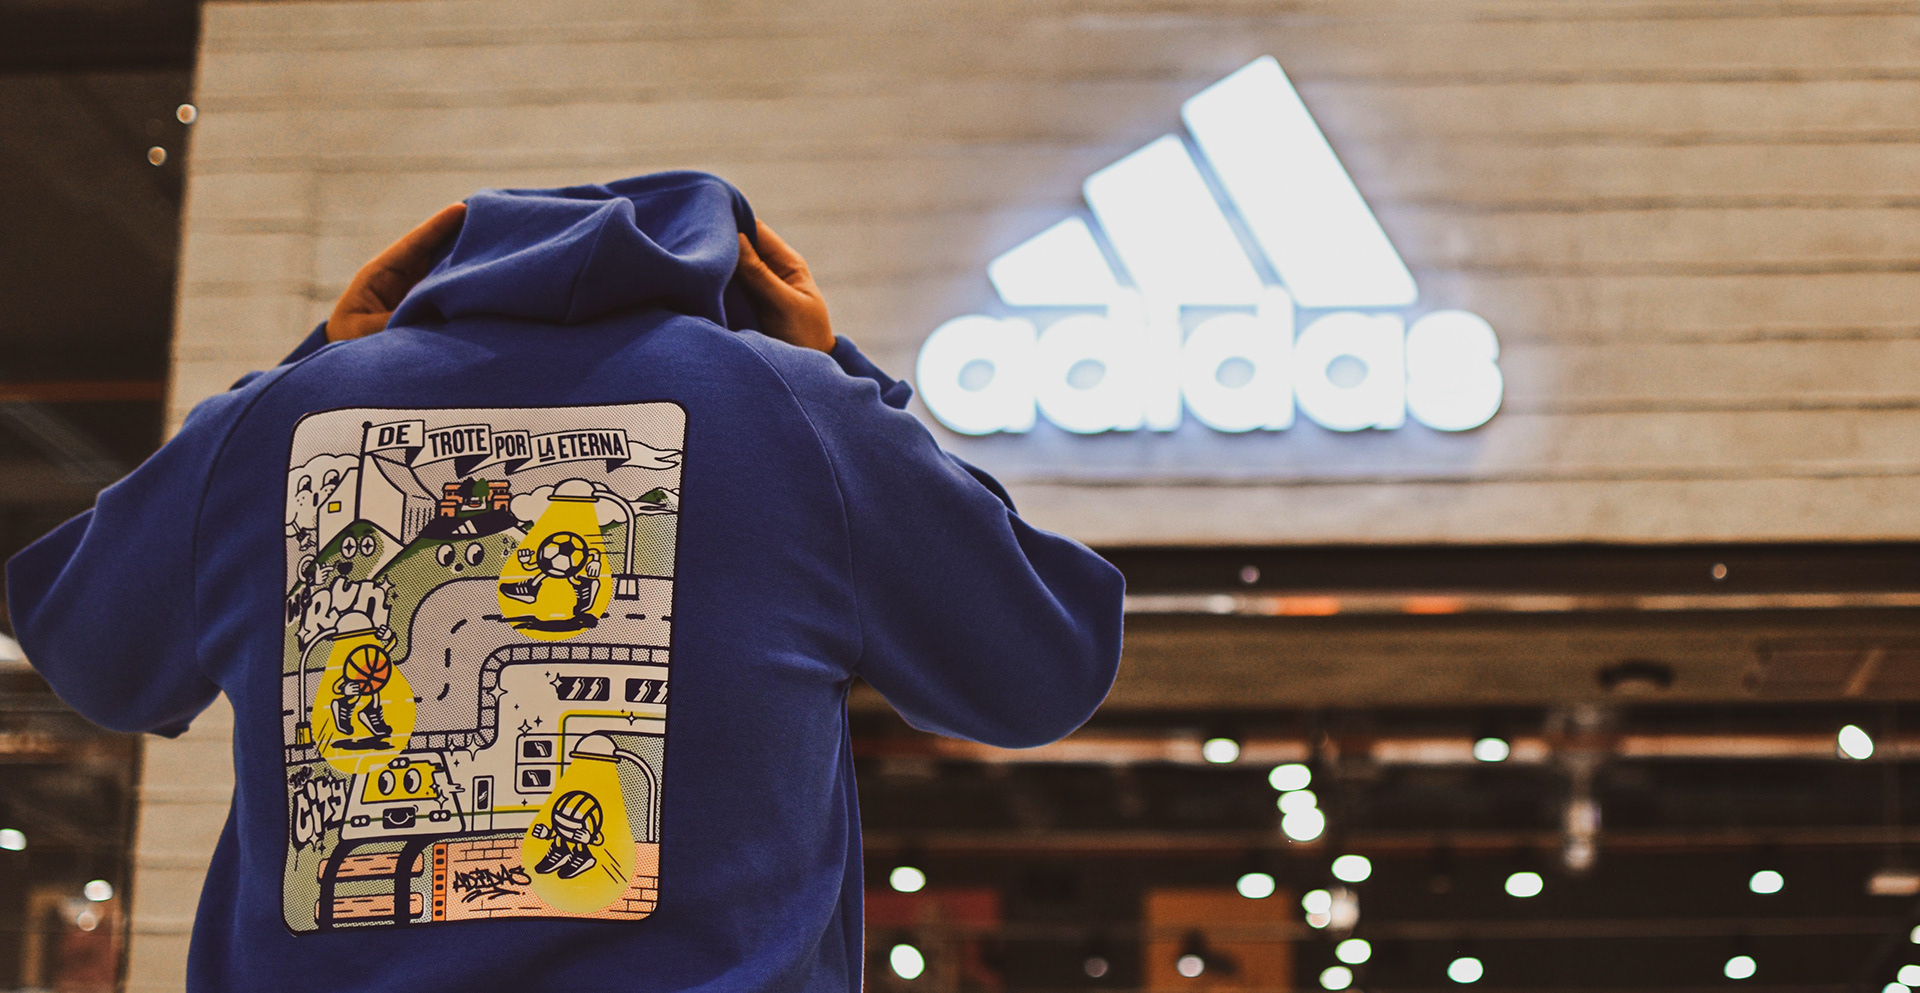 Adidas Colombia New Official Merchandise of Medellín City Designed by Nicof Maya